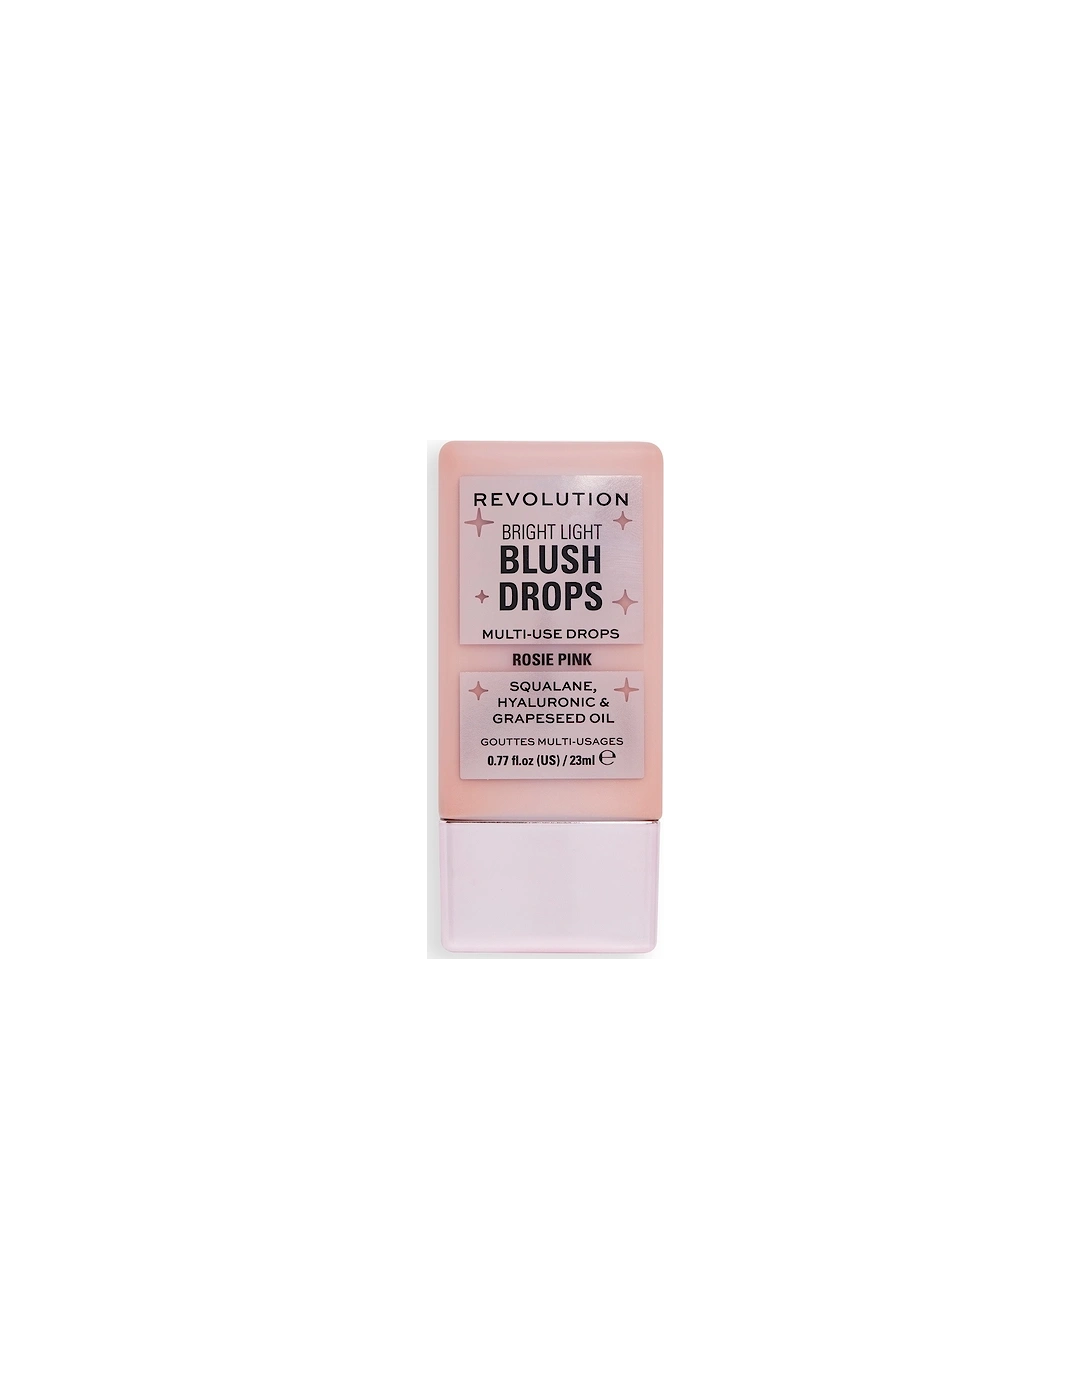 Makeup Bright Light Blush Drops - Pink Rosie, 2 of 1